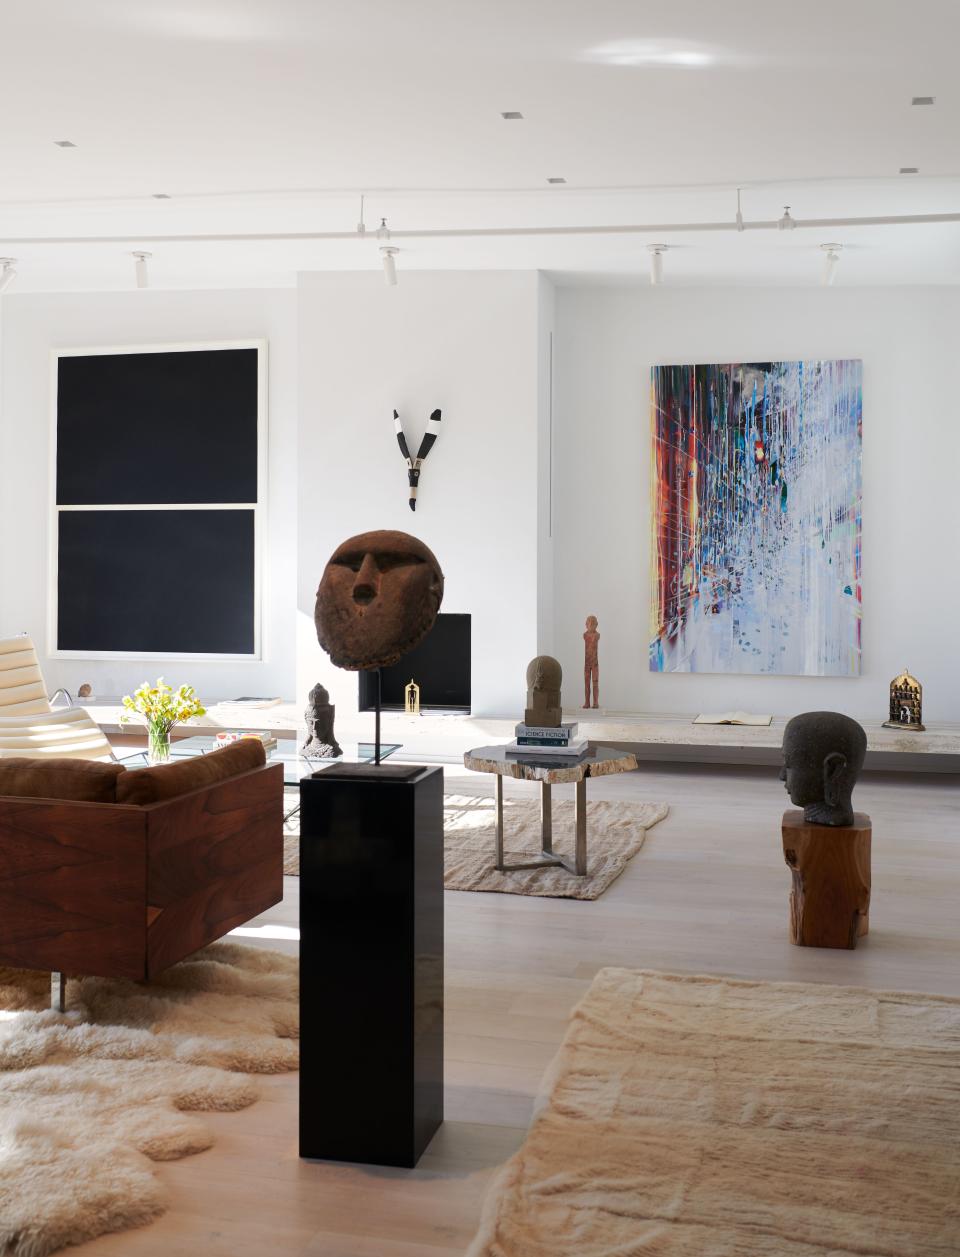 Pieces by (from left) Richard Serra, Gabriel Orozco, and Sarah Sze hang on the living room walls. In foreground, a West African mask on stand.